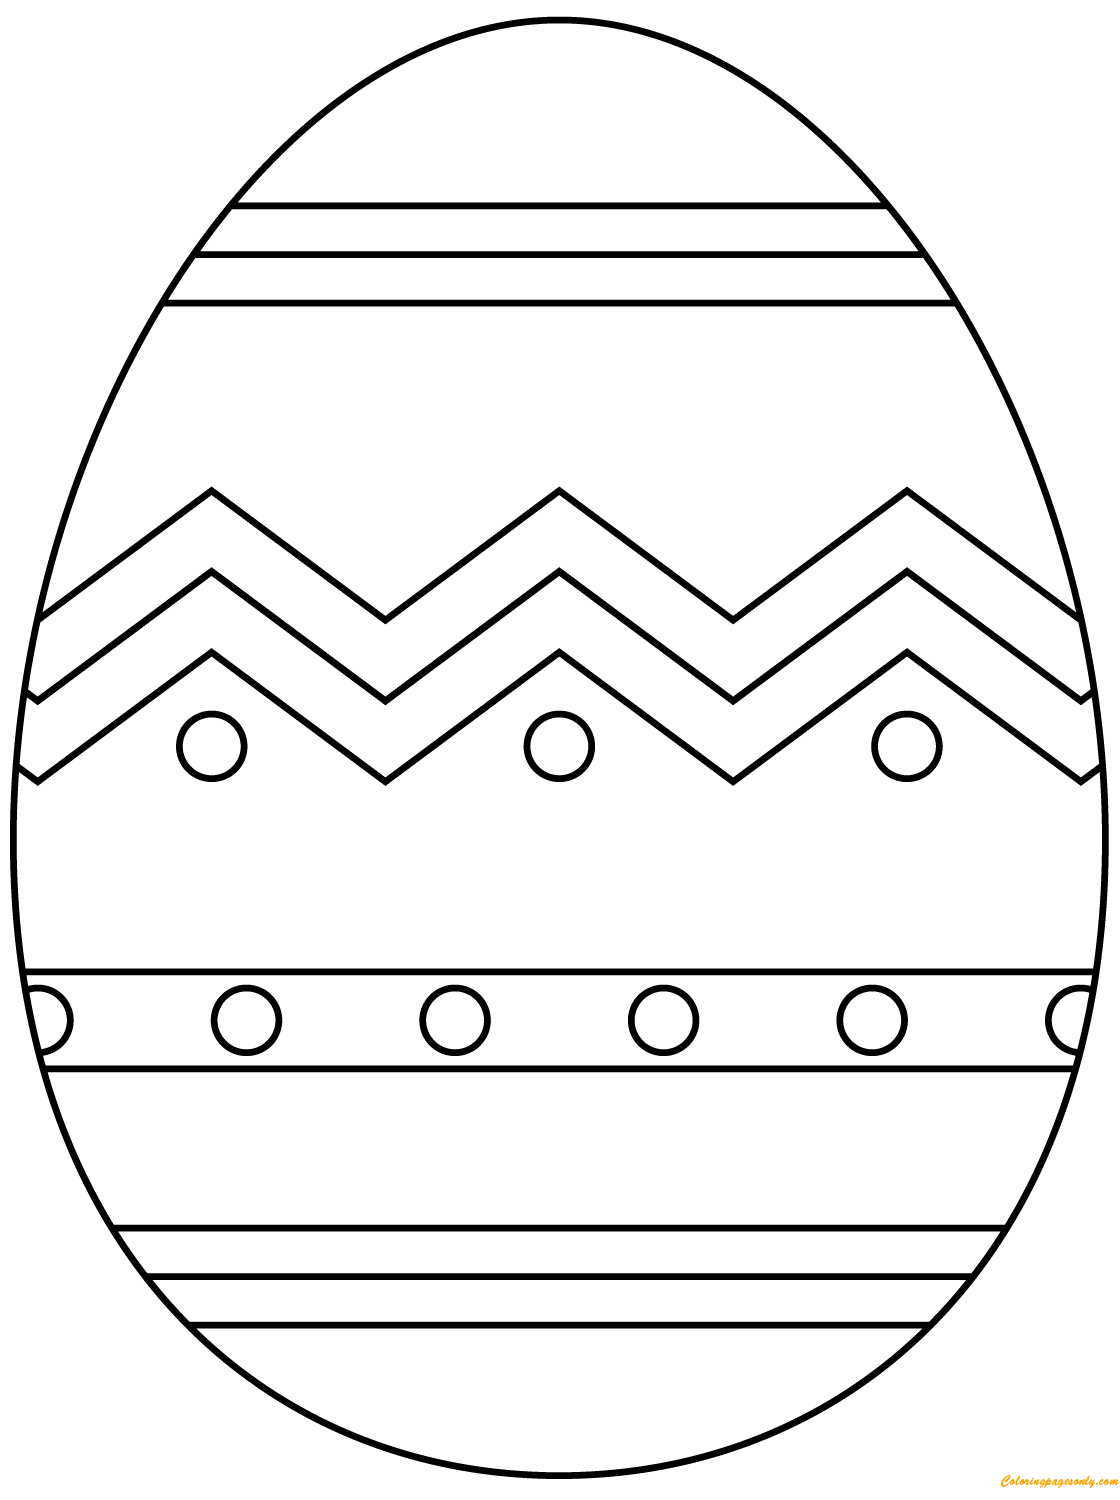 Abstract Pattern Easter Egg Coloring Page - Free Coloring Pages Online